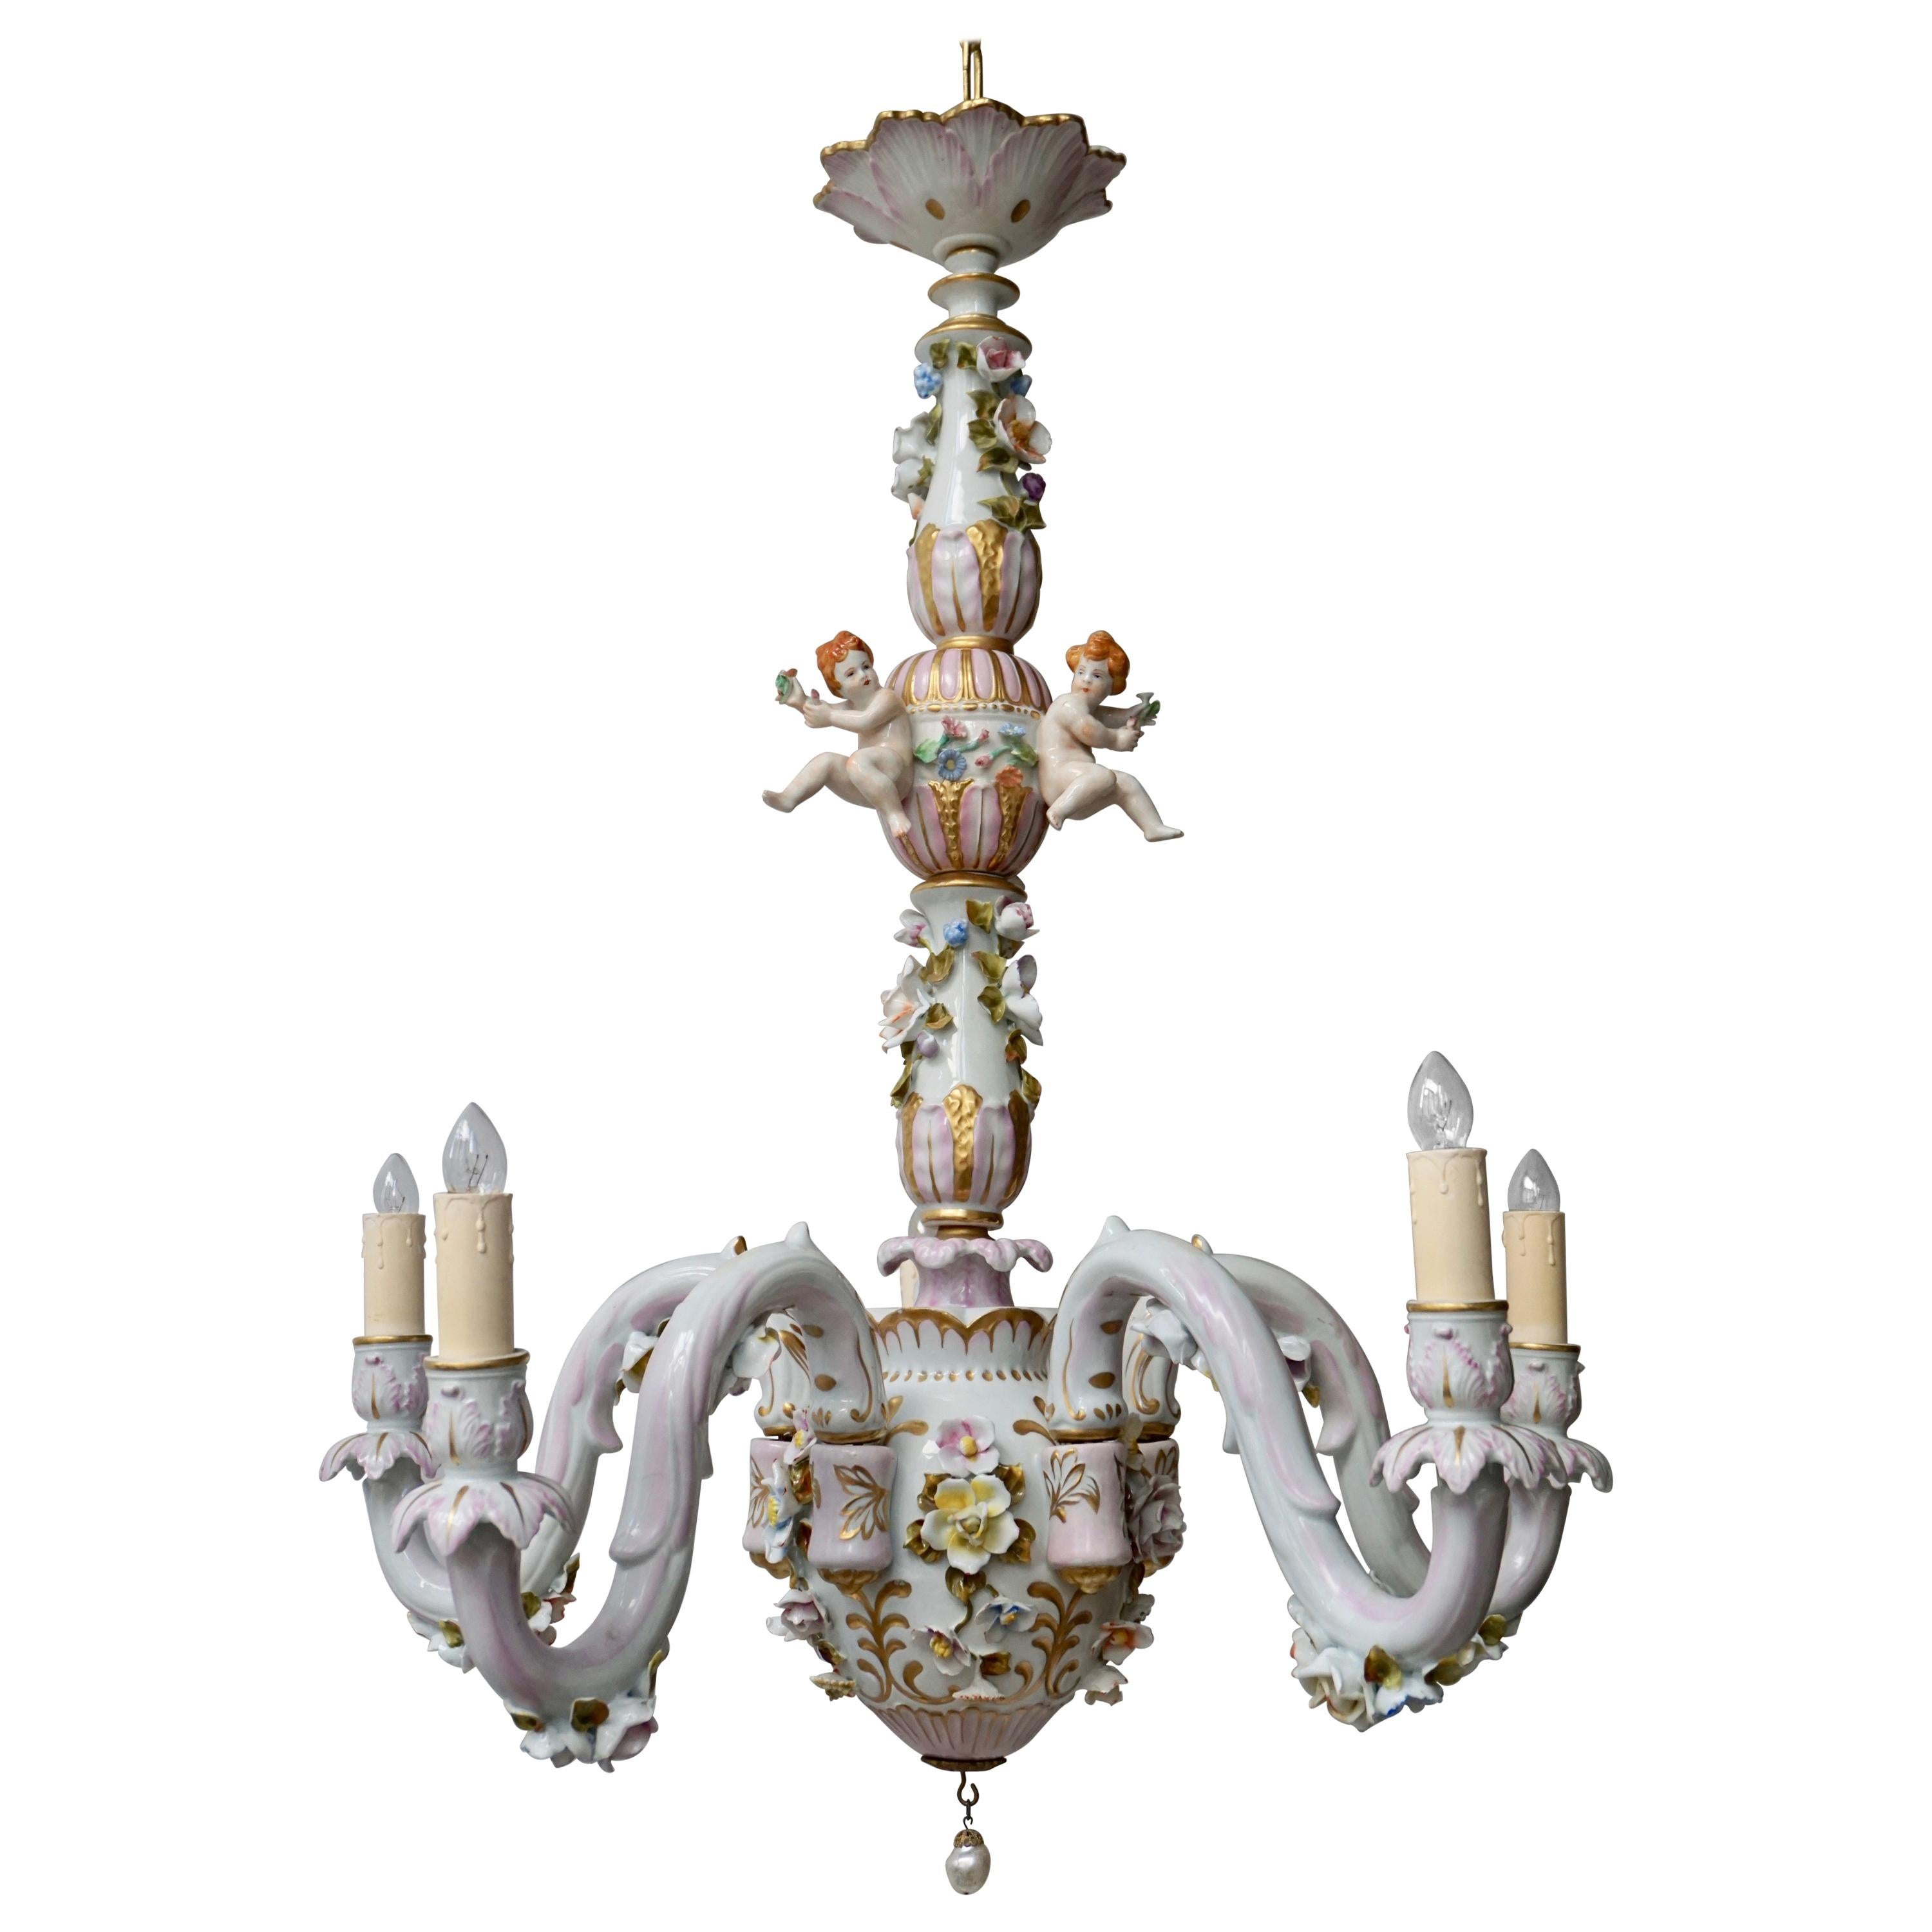 Capodimonte Porcelain Five Lights Chandelier with Putti and Floral Patterns